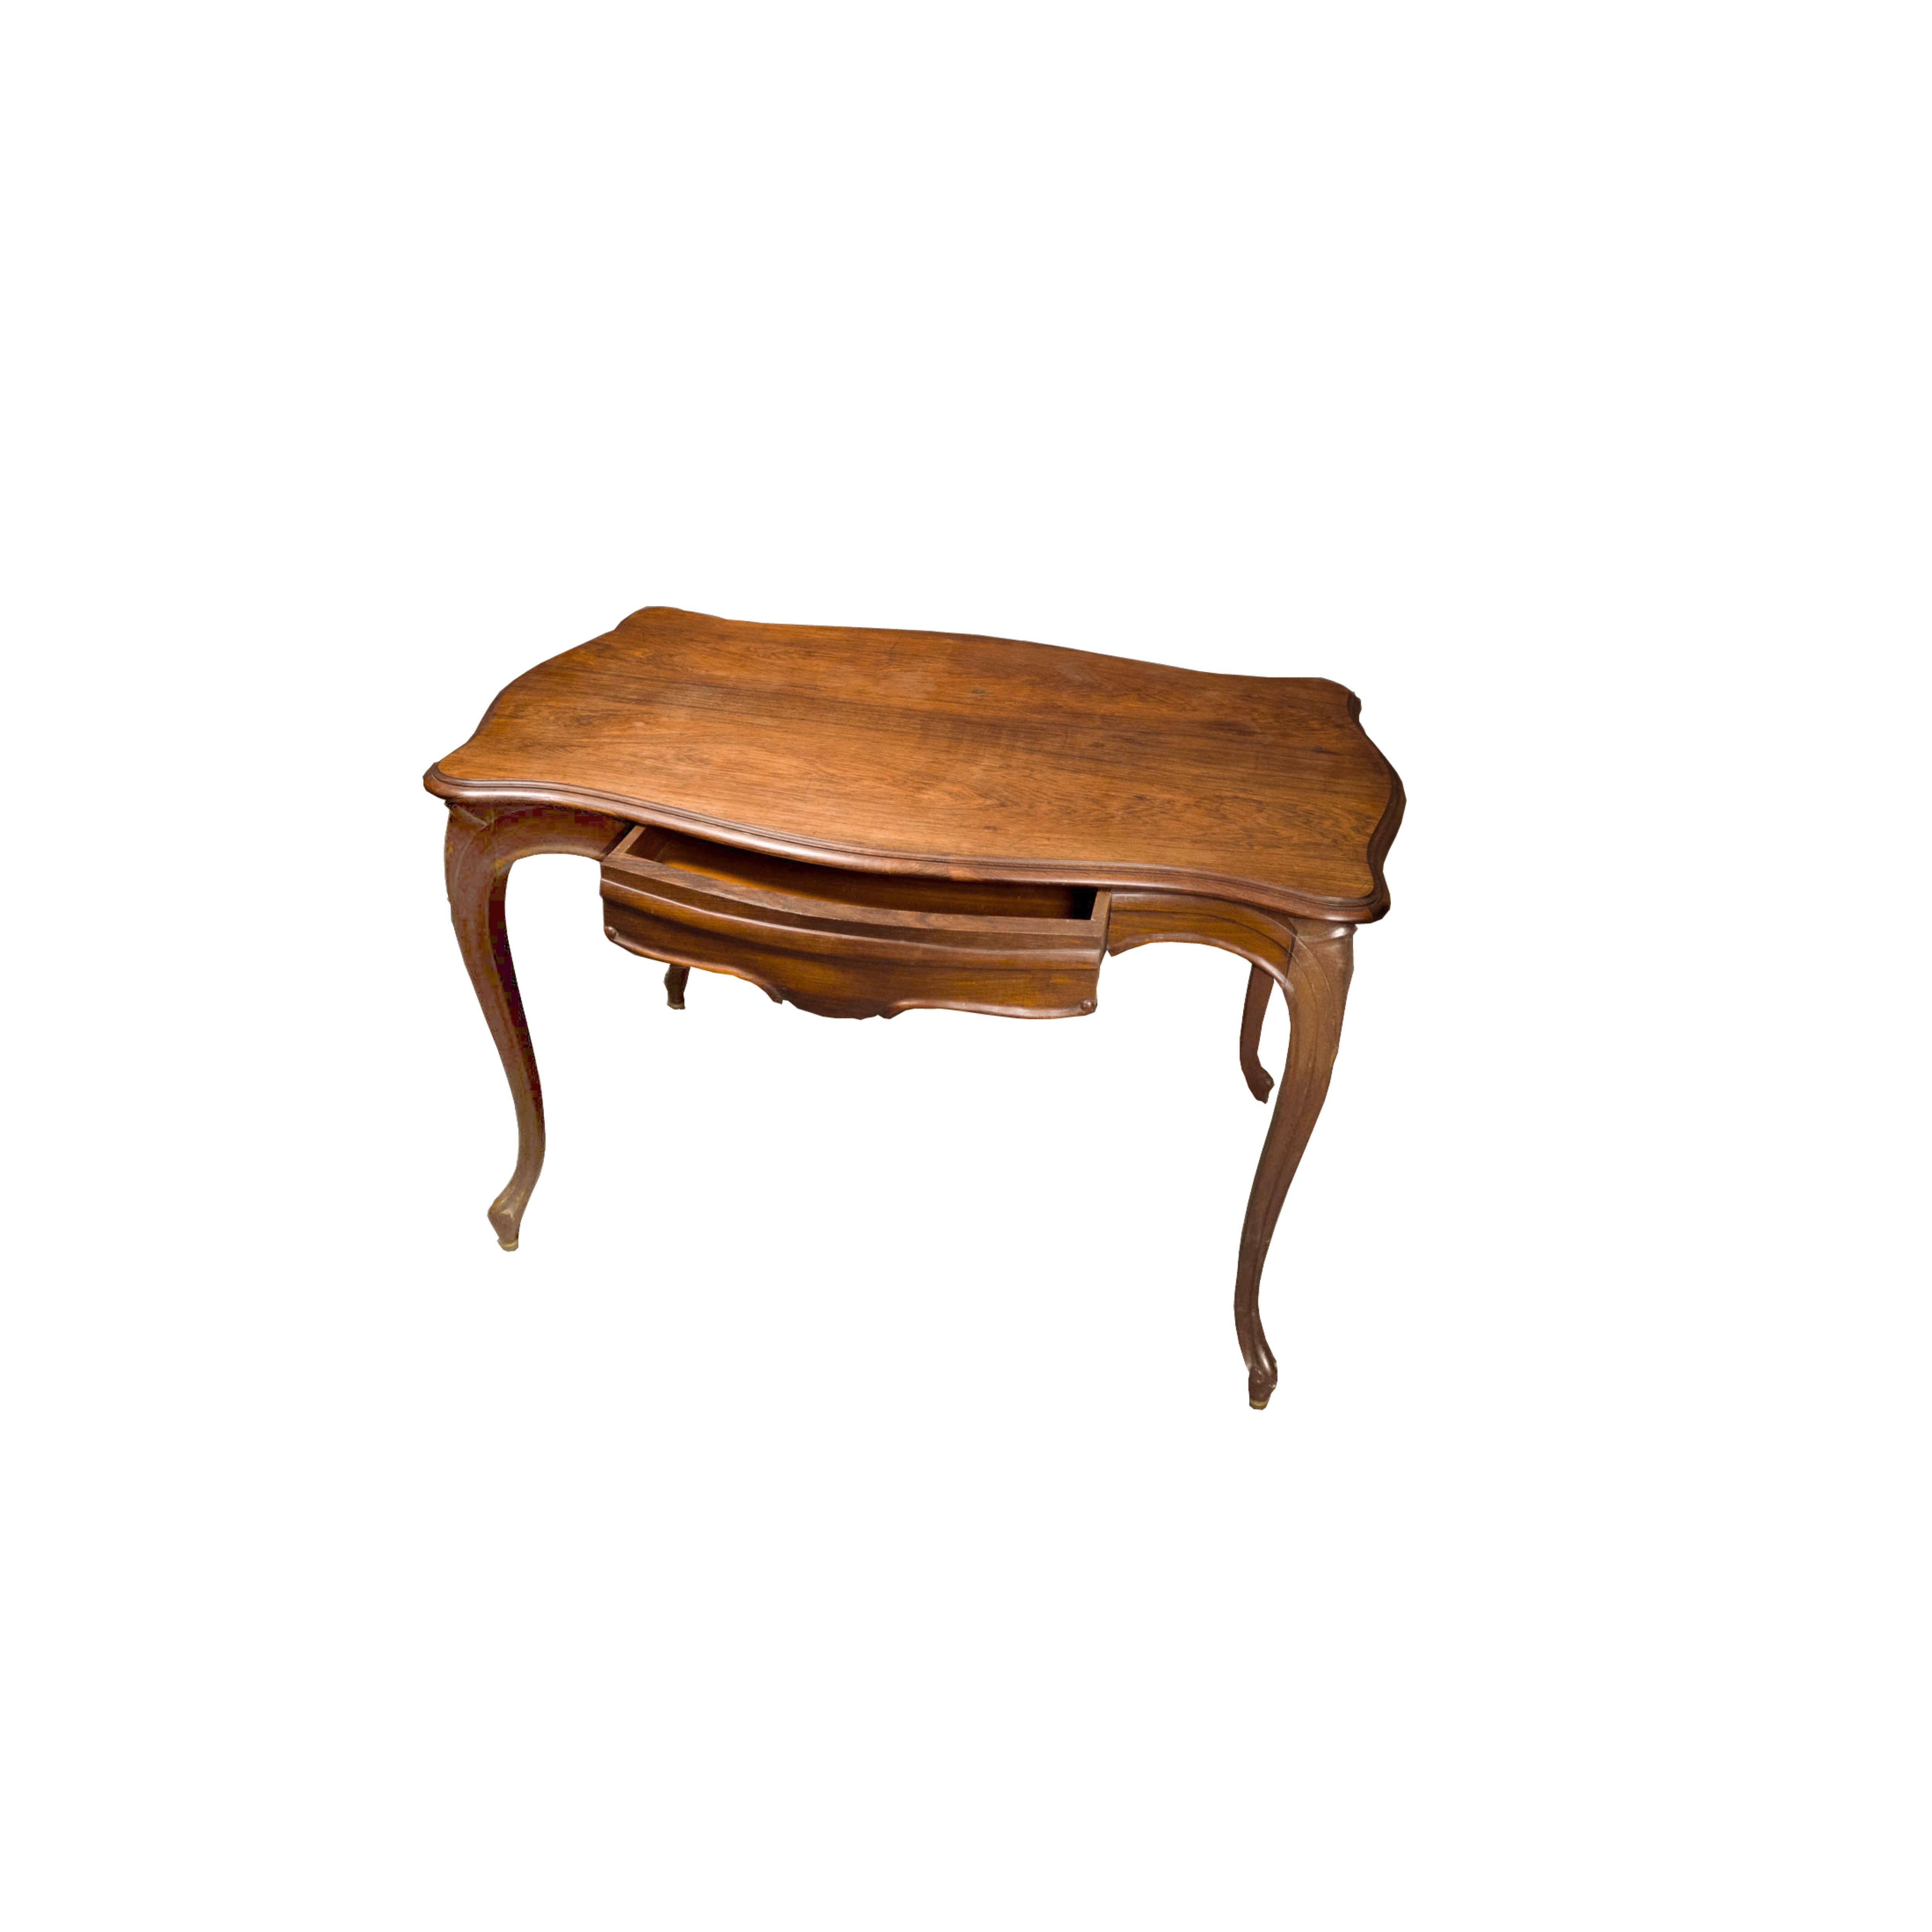 A baroque style walnut writing table with a serpentine rectangular top, rounded frieze, deeply sculpted cabriole legs, pipe legs and wide drawer.Comfort and order. An exemplar of elegance.